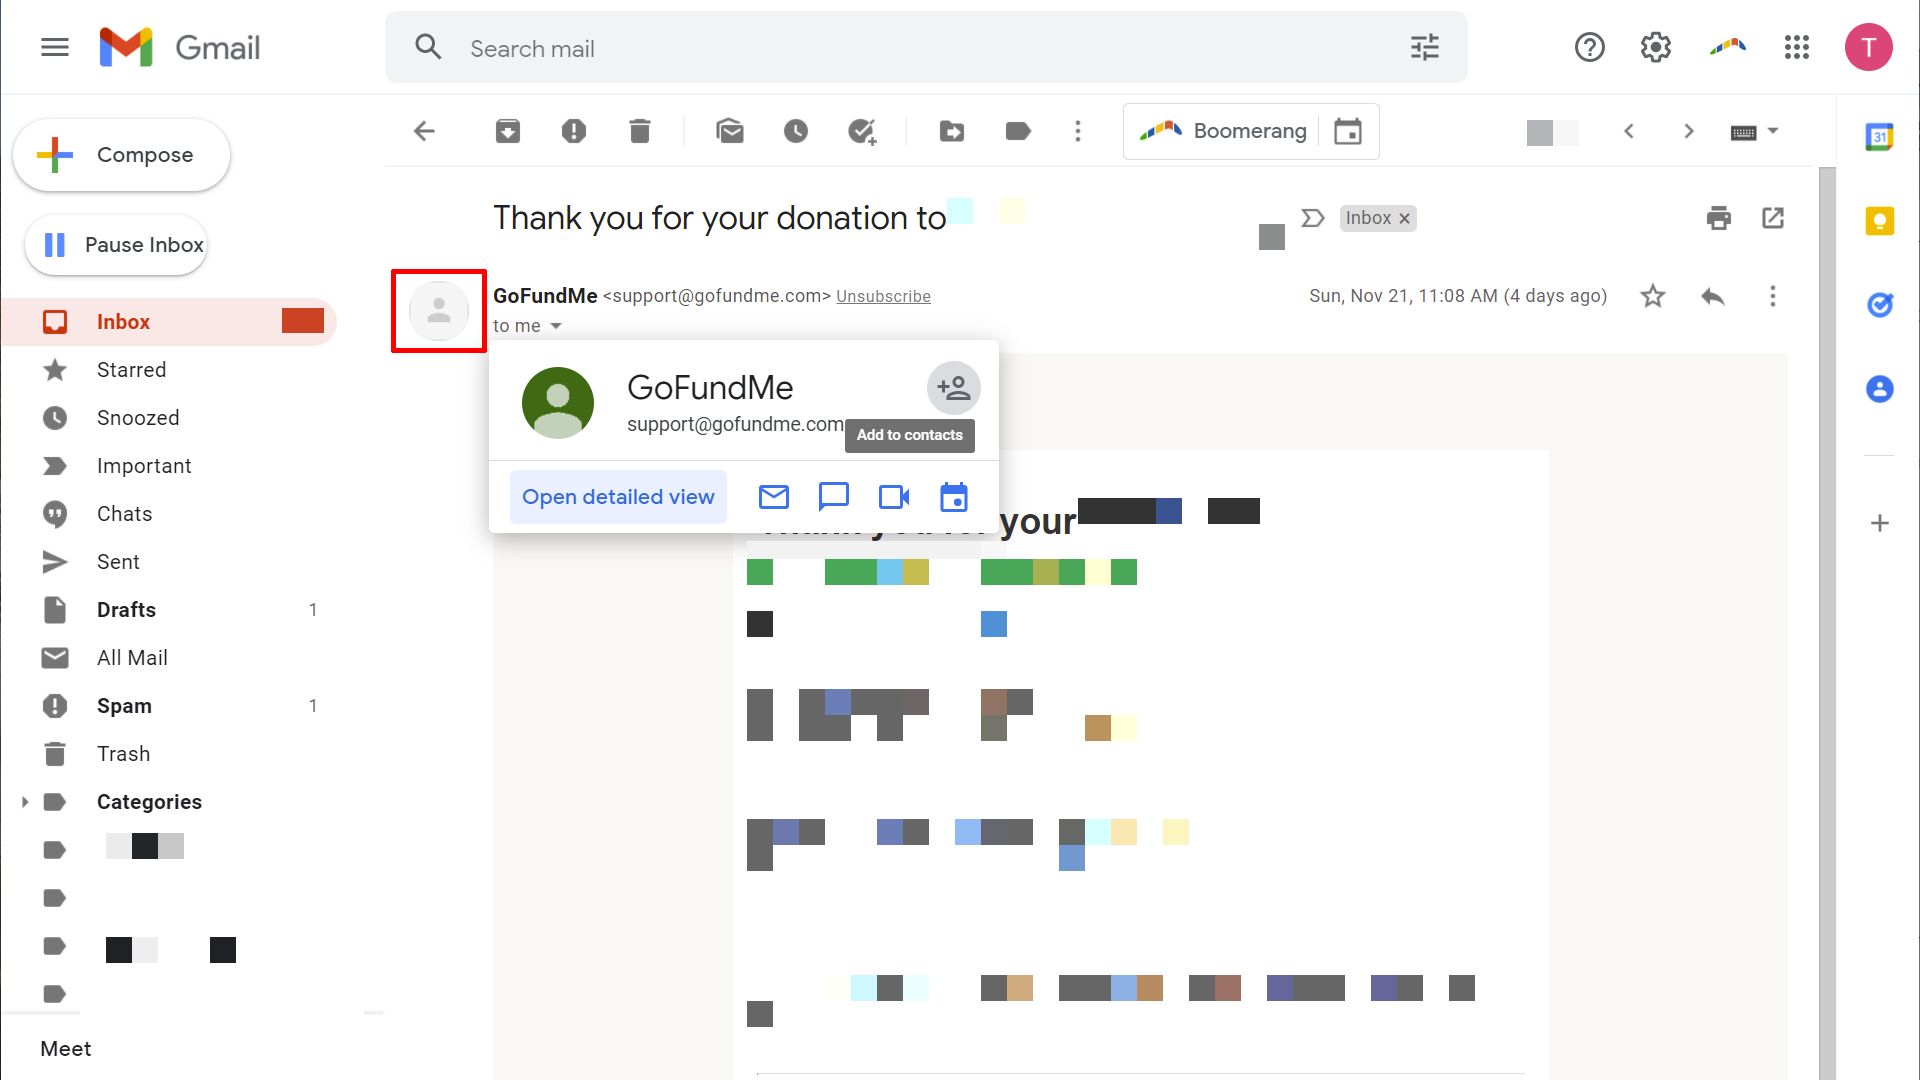 Adding a new contact from the gmail webmail interface.